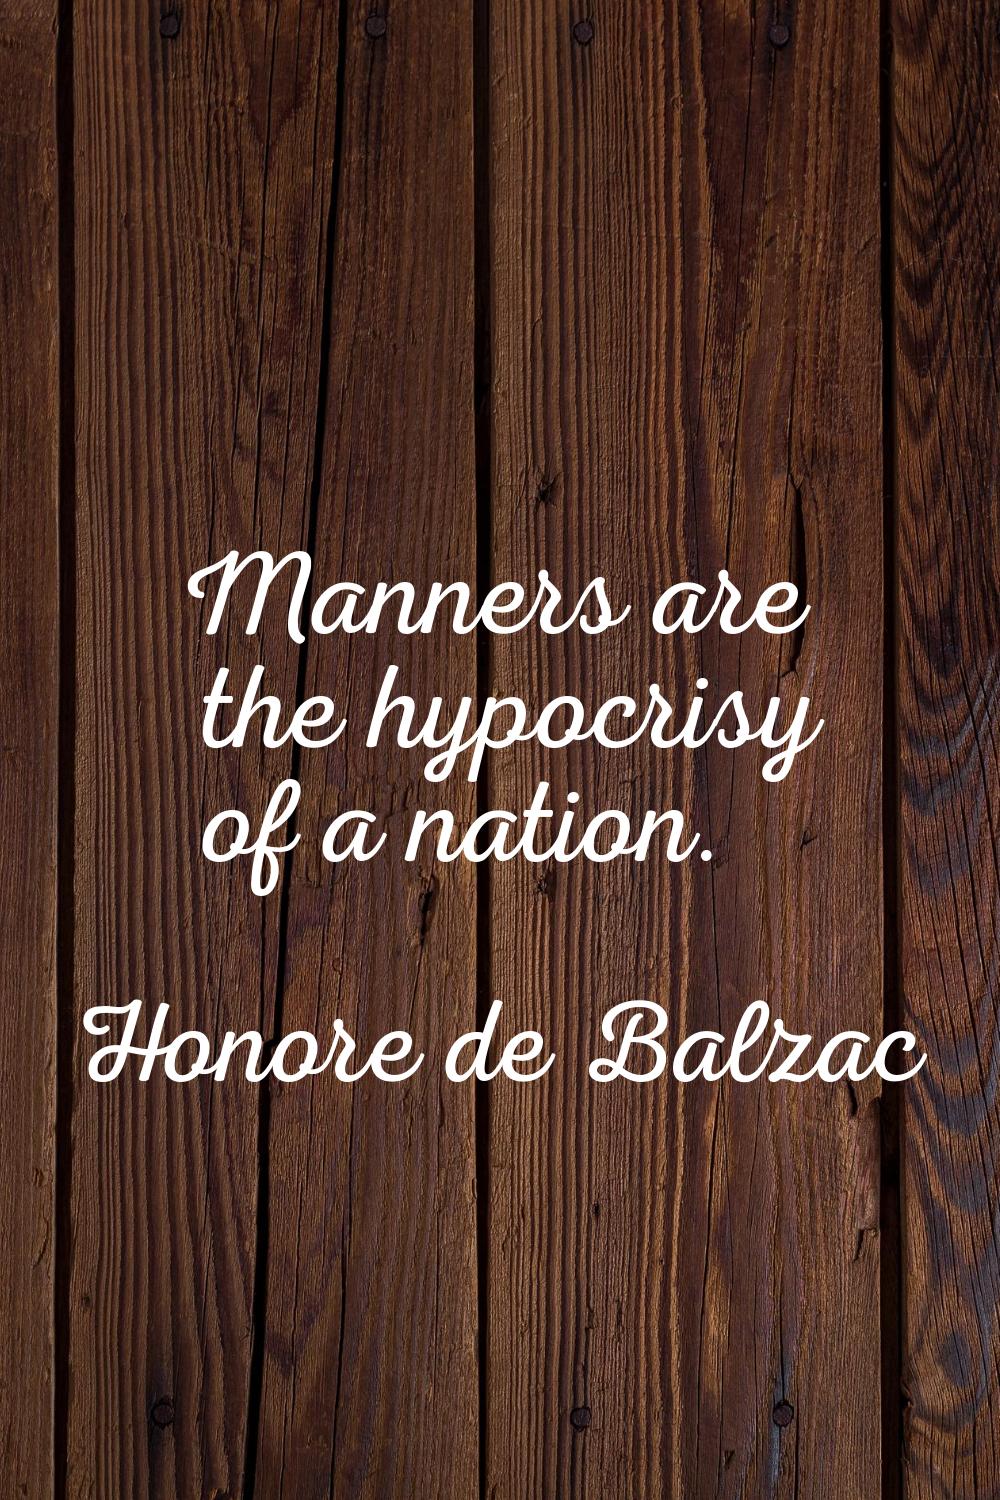 Manners are the hypocrisy of a nation.